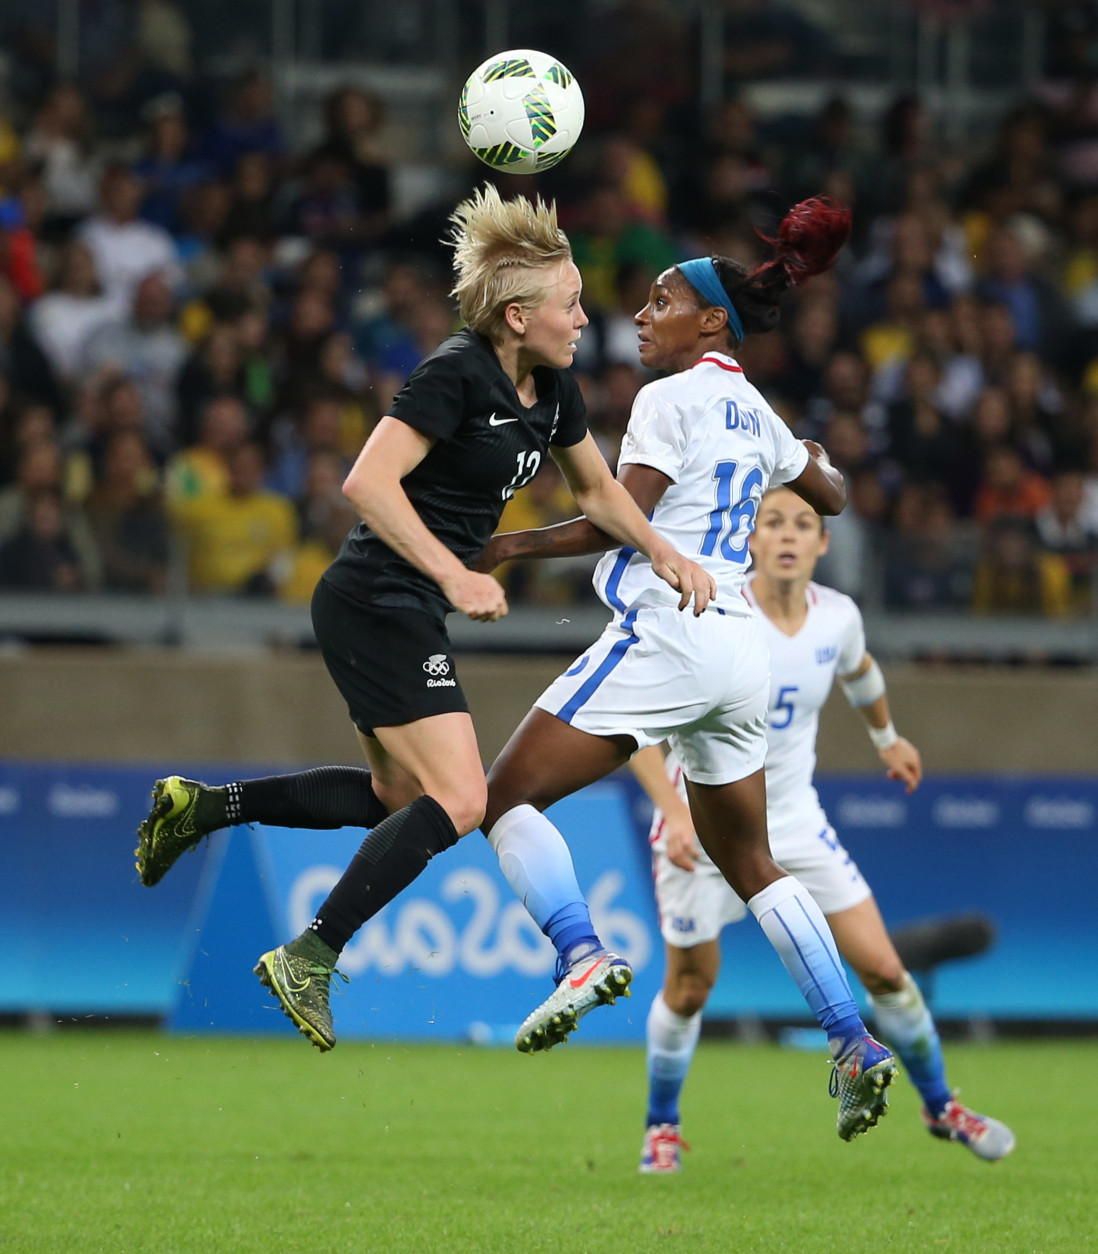 New Zealand's Betsy Hassett, left, and United States' Crystal Dunn jump for the ball during a women's Olympic football tournament match at the Mineirao stadium in Belo Horizonte, Brazil, Wednesday, Aug. 3, 2016. United States won 2-0. (AP Photo/Eugenio Savio)